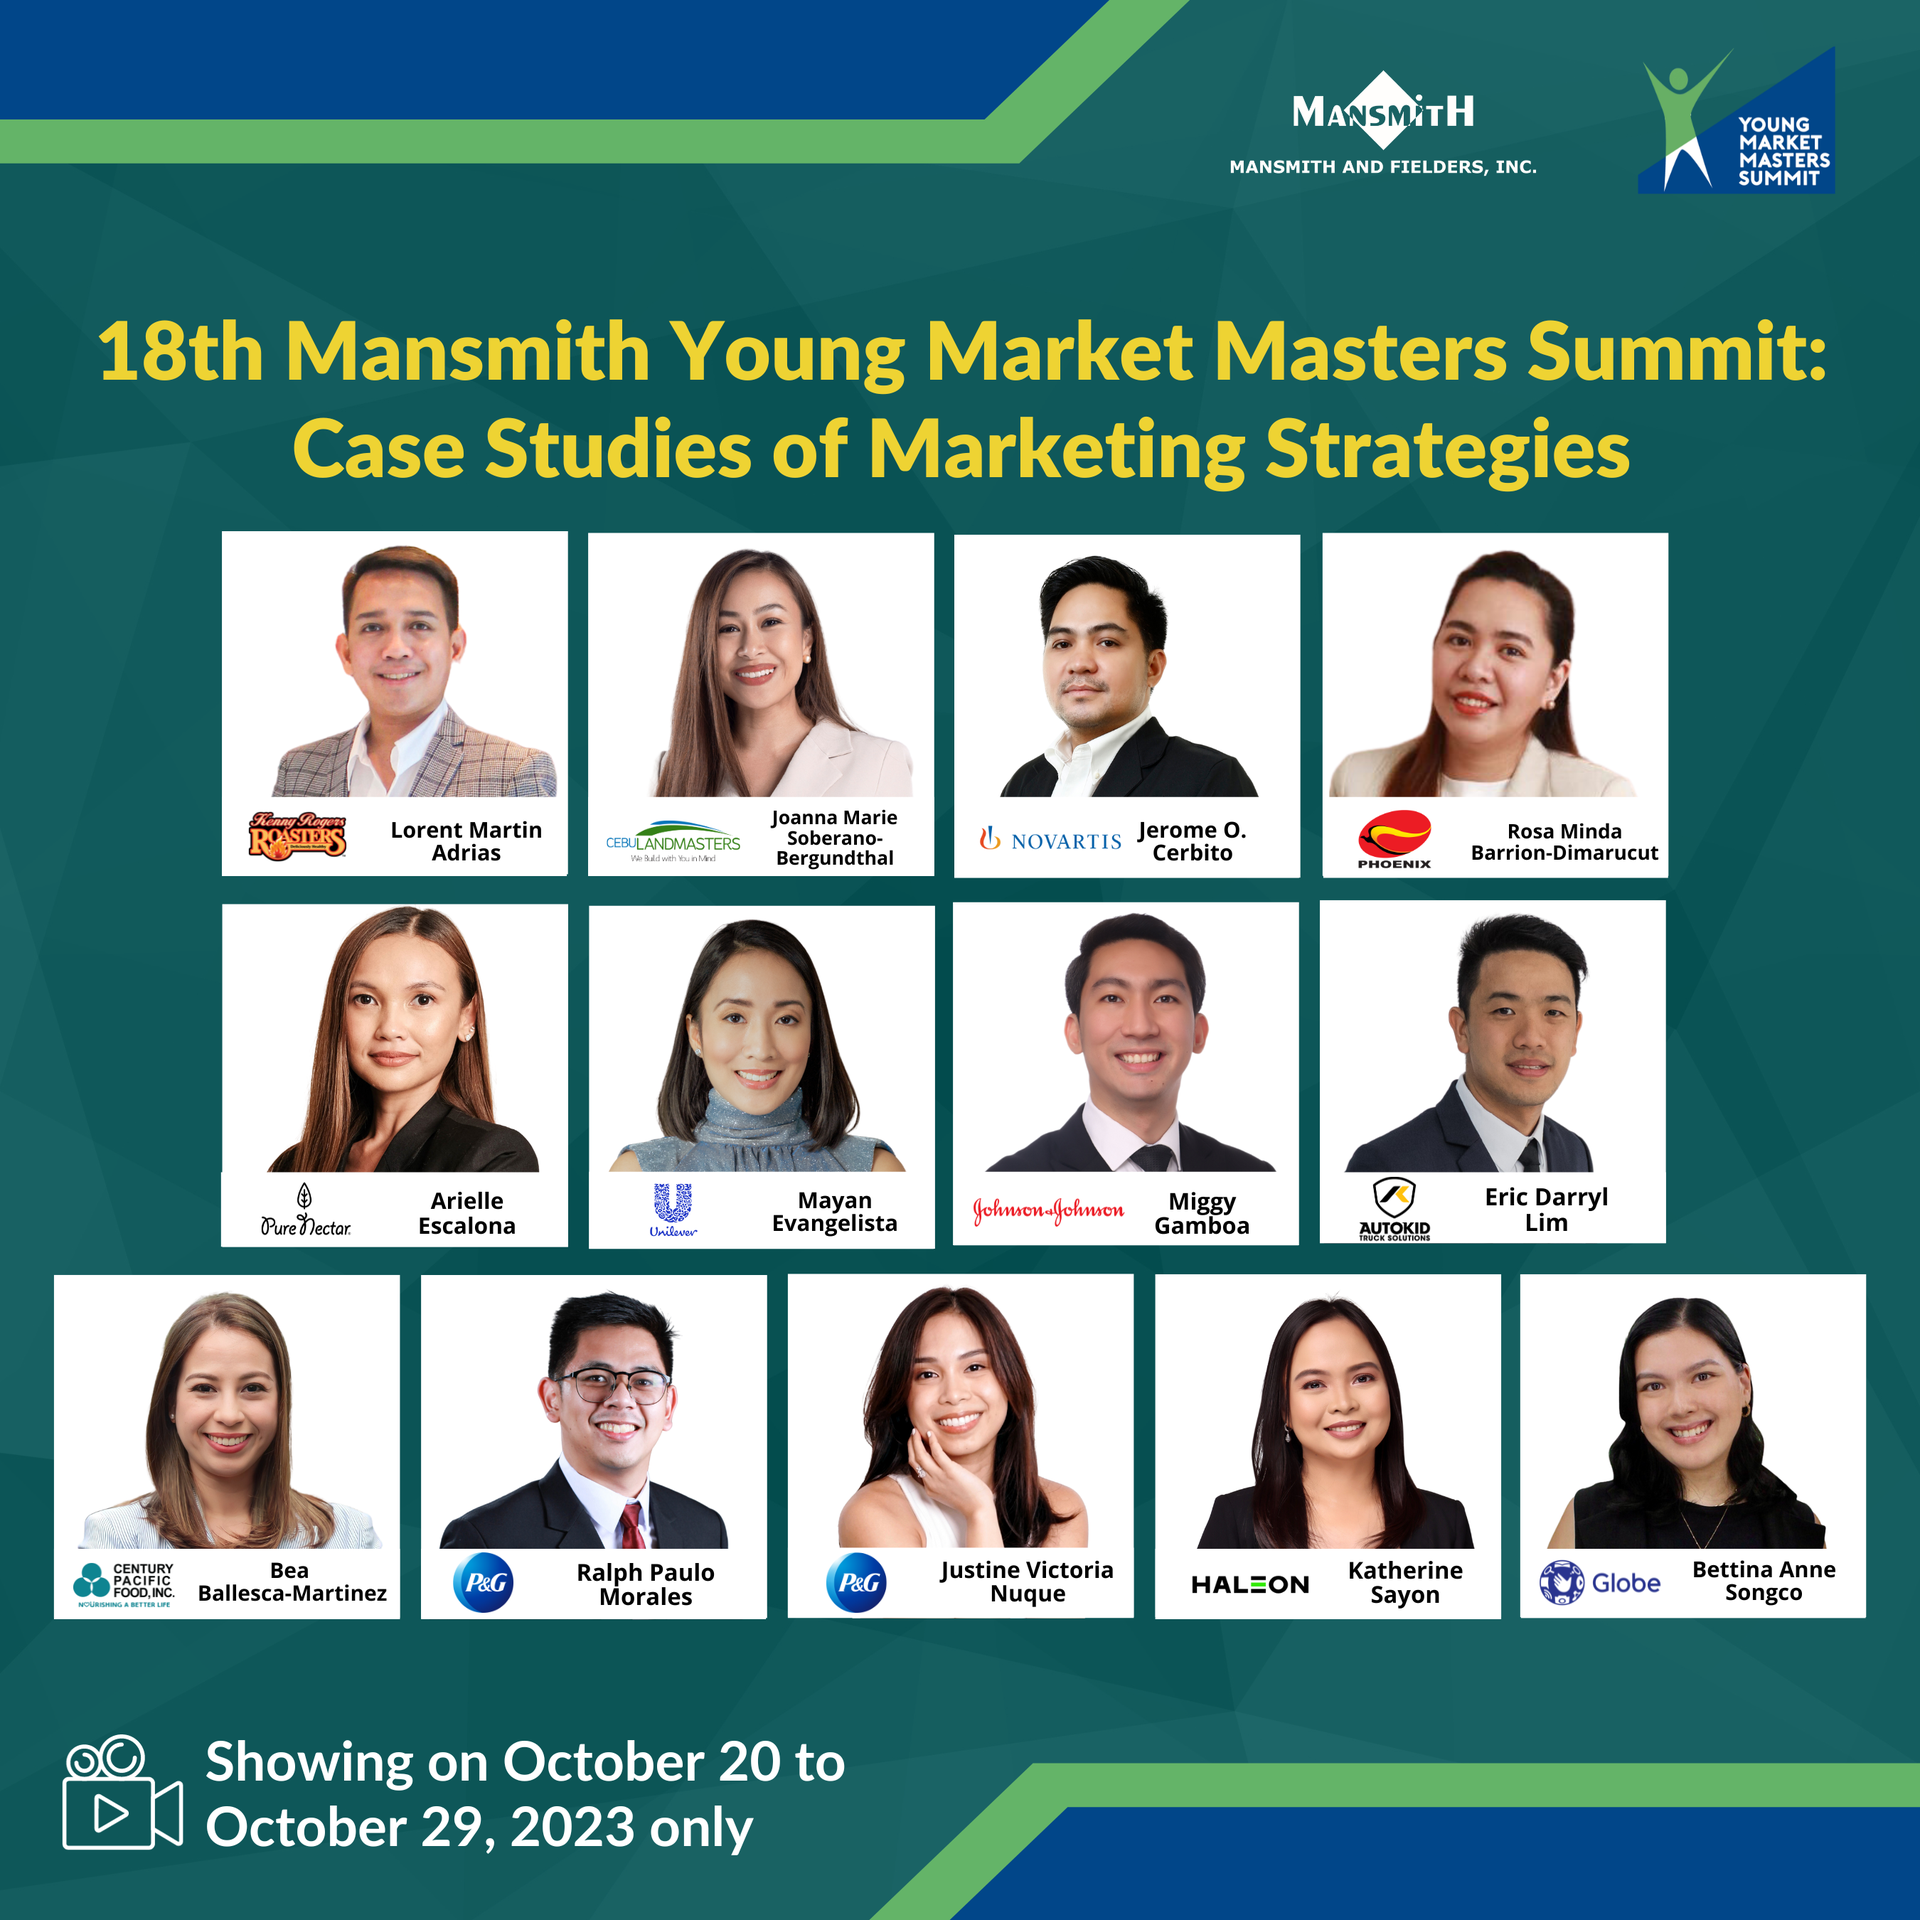 18th Mansmith Young Market Masters Summit: Case Studies of Marketing Strategies